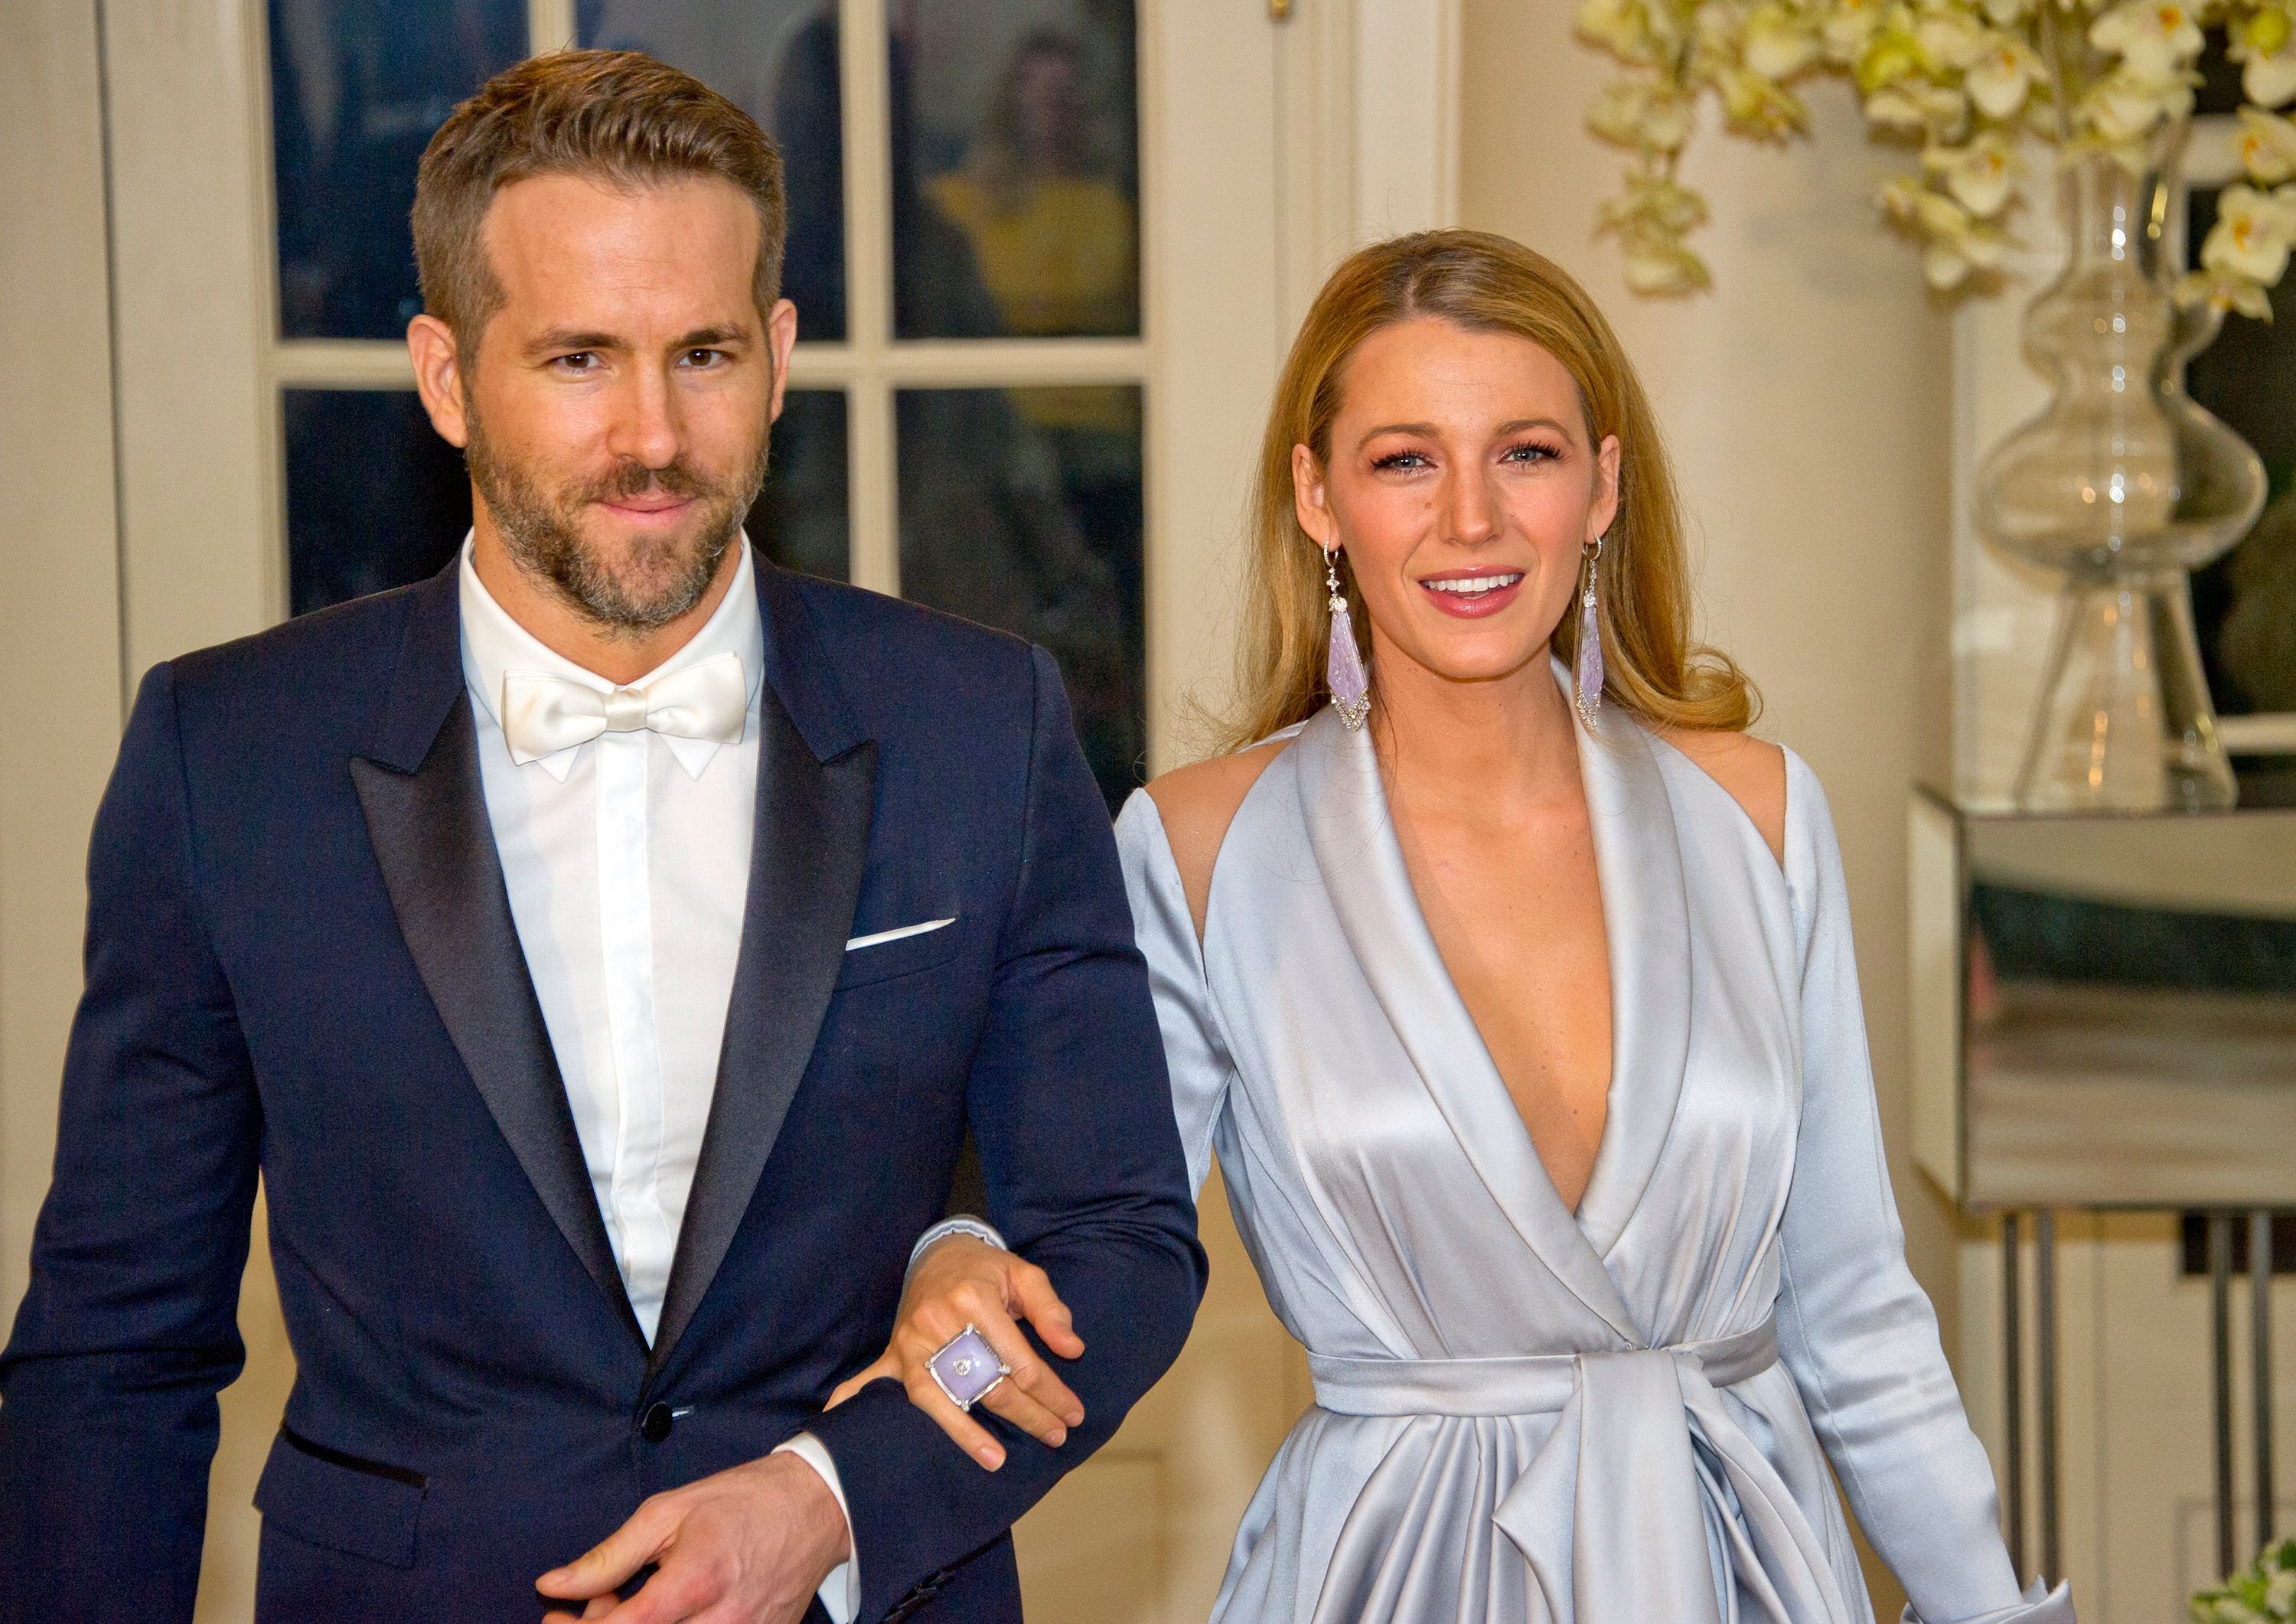 Ryan Reynolds and Blake Lively at a State Dinner in honor of Canadian Prime Minister Trudeau at the White House in 2016 | Source: Getty Images